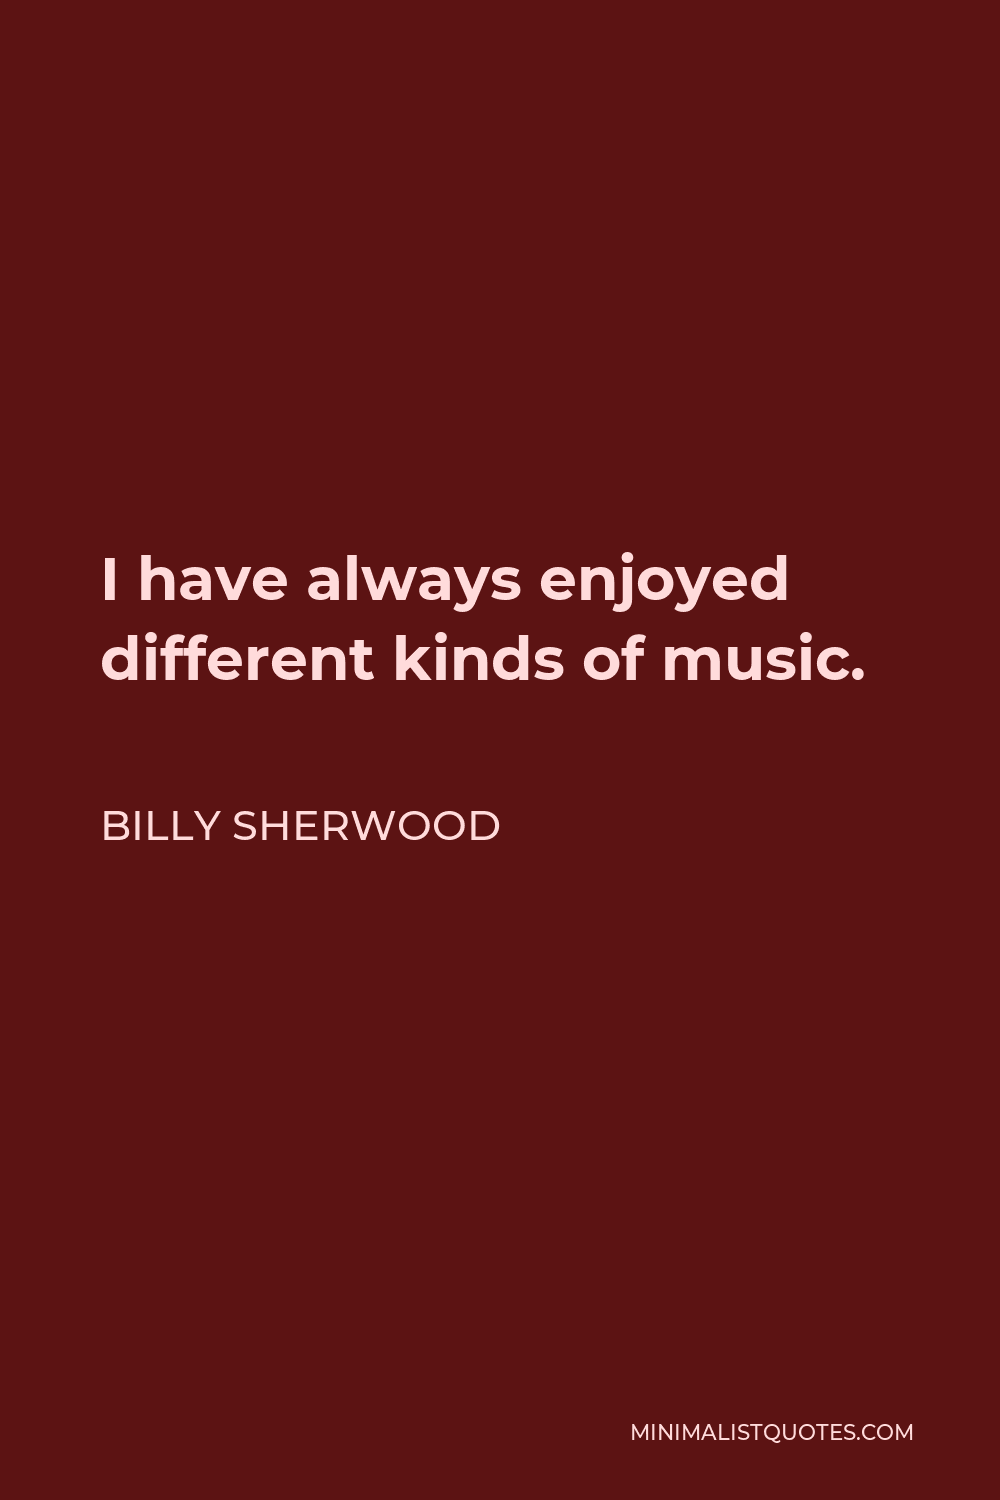 Billy Sherwood Quote - I have always enjoyed different kinds of music.